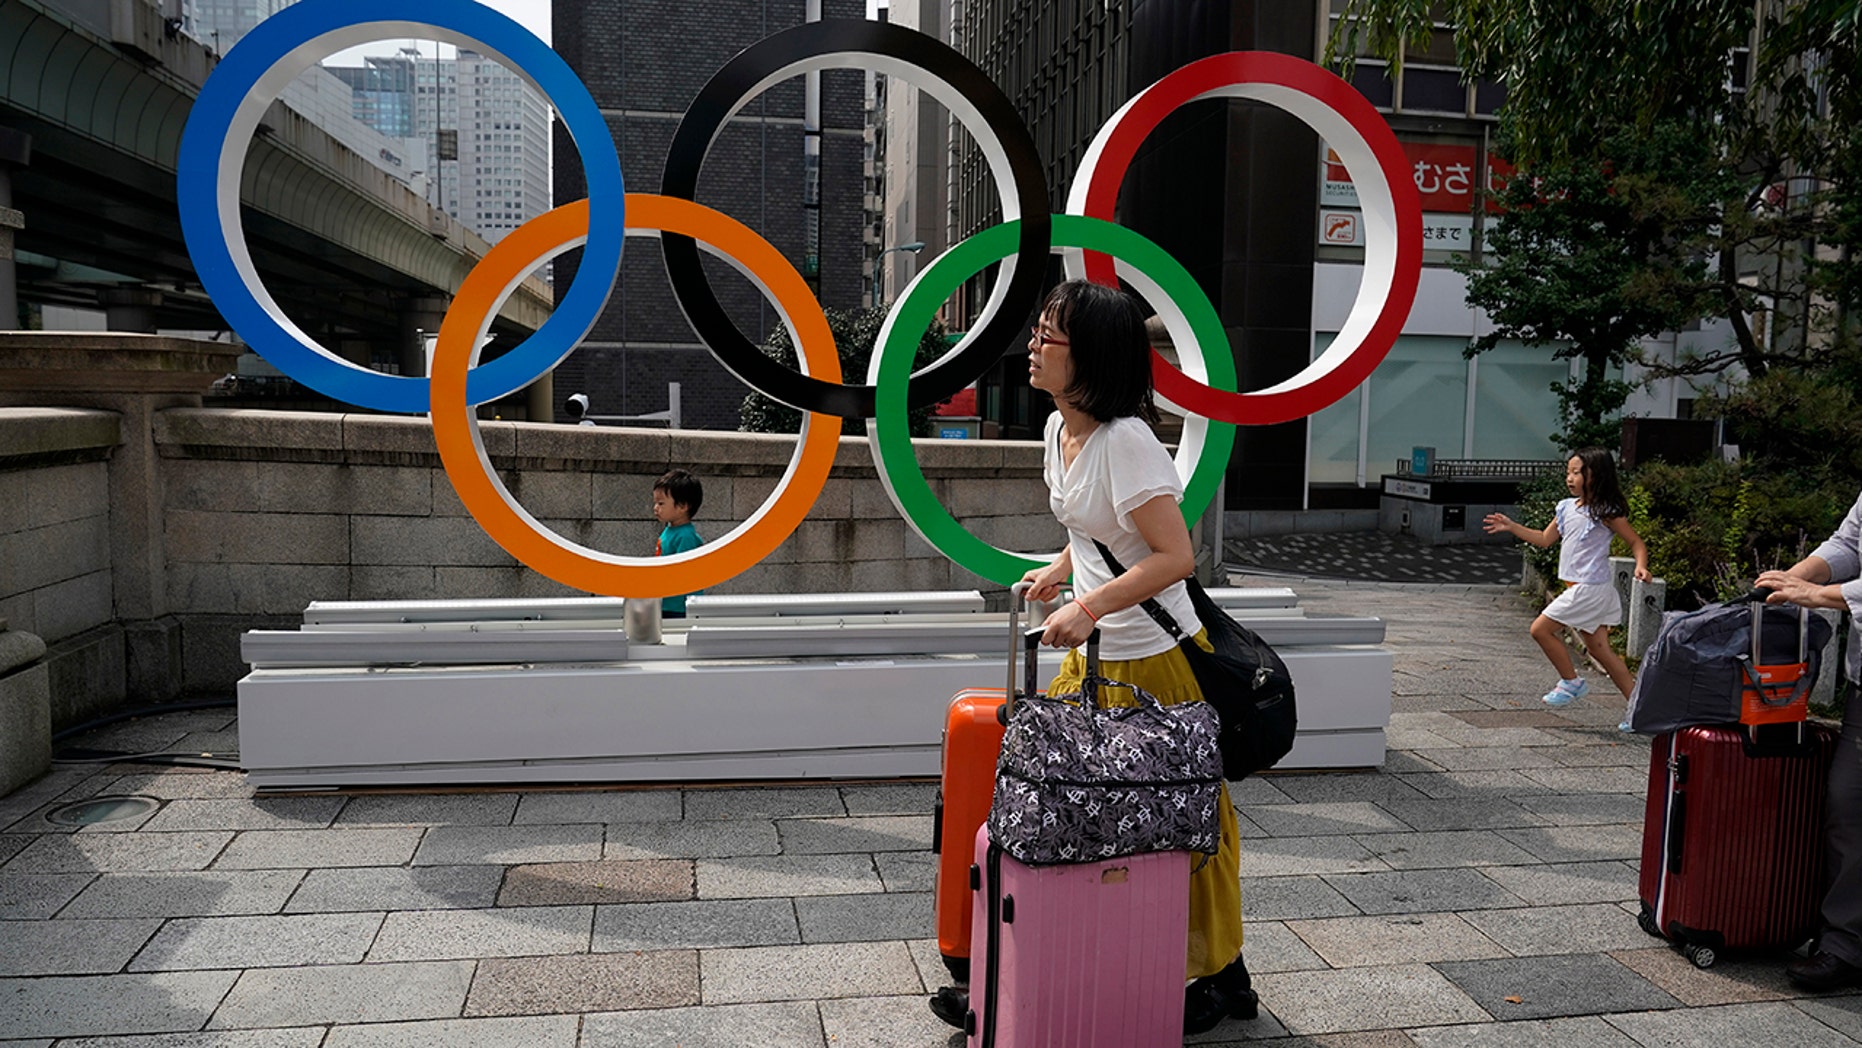 On this Monday, August 19, 2019, photo, tourists walk with their luggage in front of the Olympic rings in Tokyo. Tokyo announces itself as a very expensive Olympics. The demand for tickets is unprecedented, scalping will flourish. Hotel rates are five to six times more normal. And arriving here will be expensive, especially for fans from the Americas and Europe. (AP Photo / Jae C. Hong)